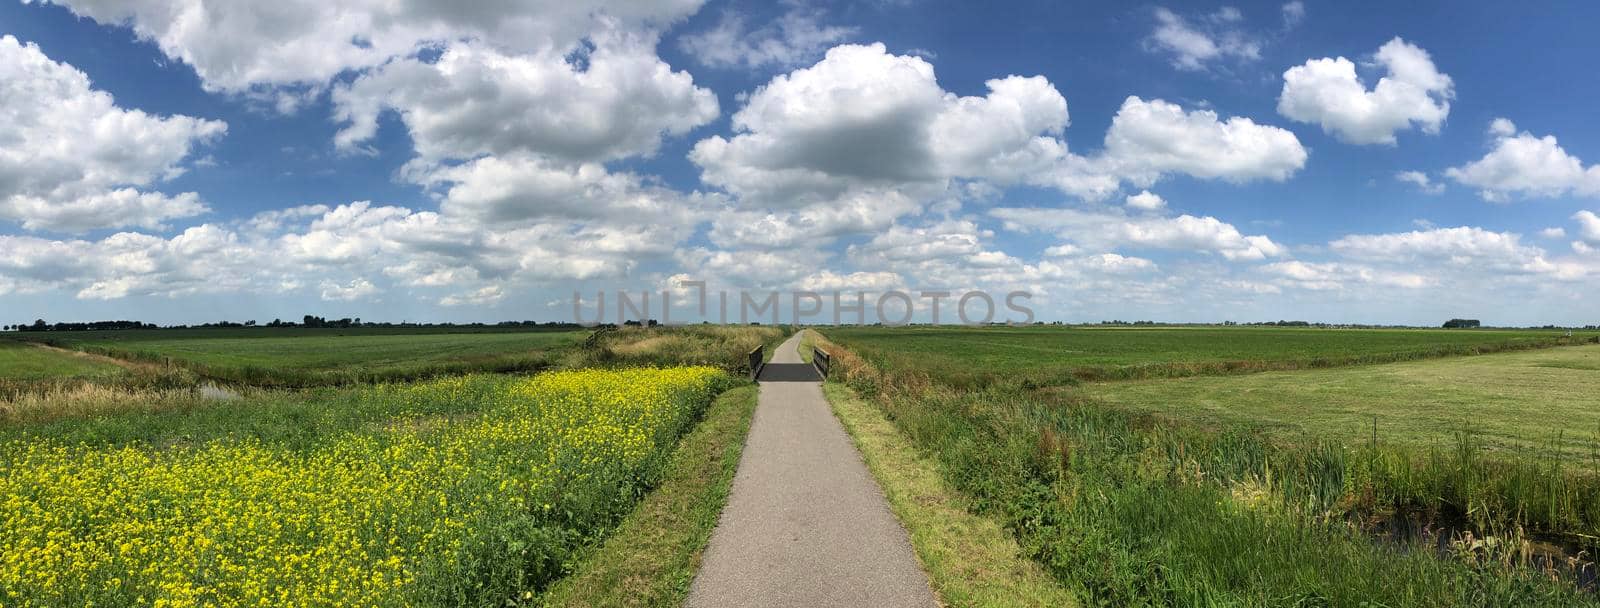 Panorama from around Oudega in Friesland, The Netherlands